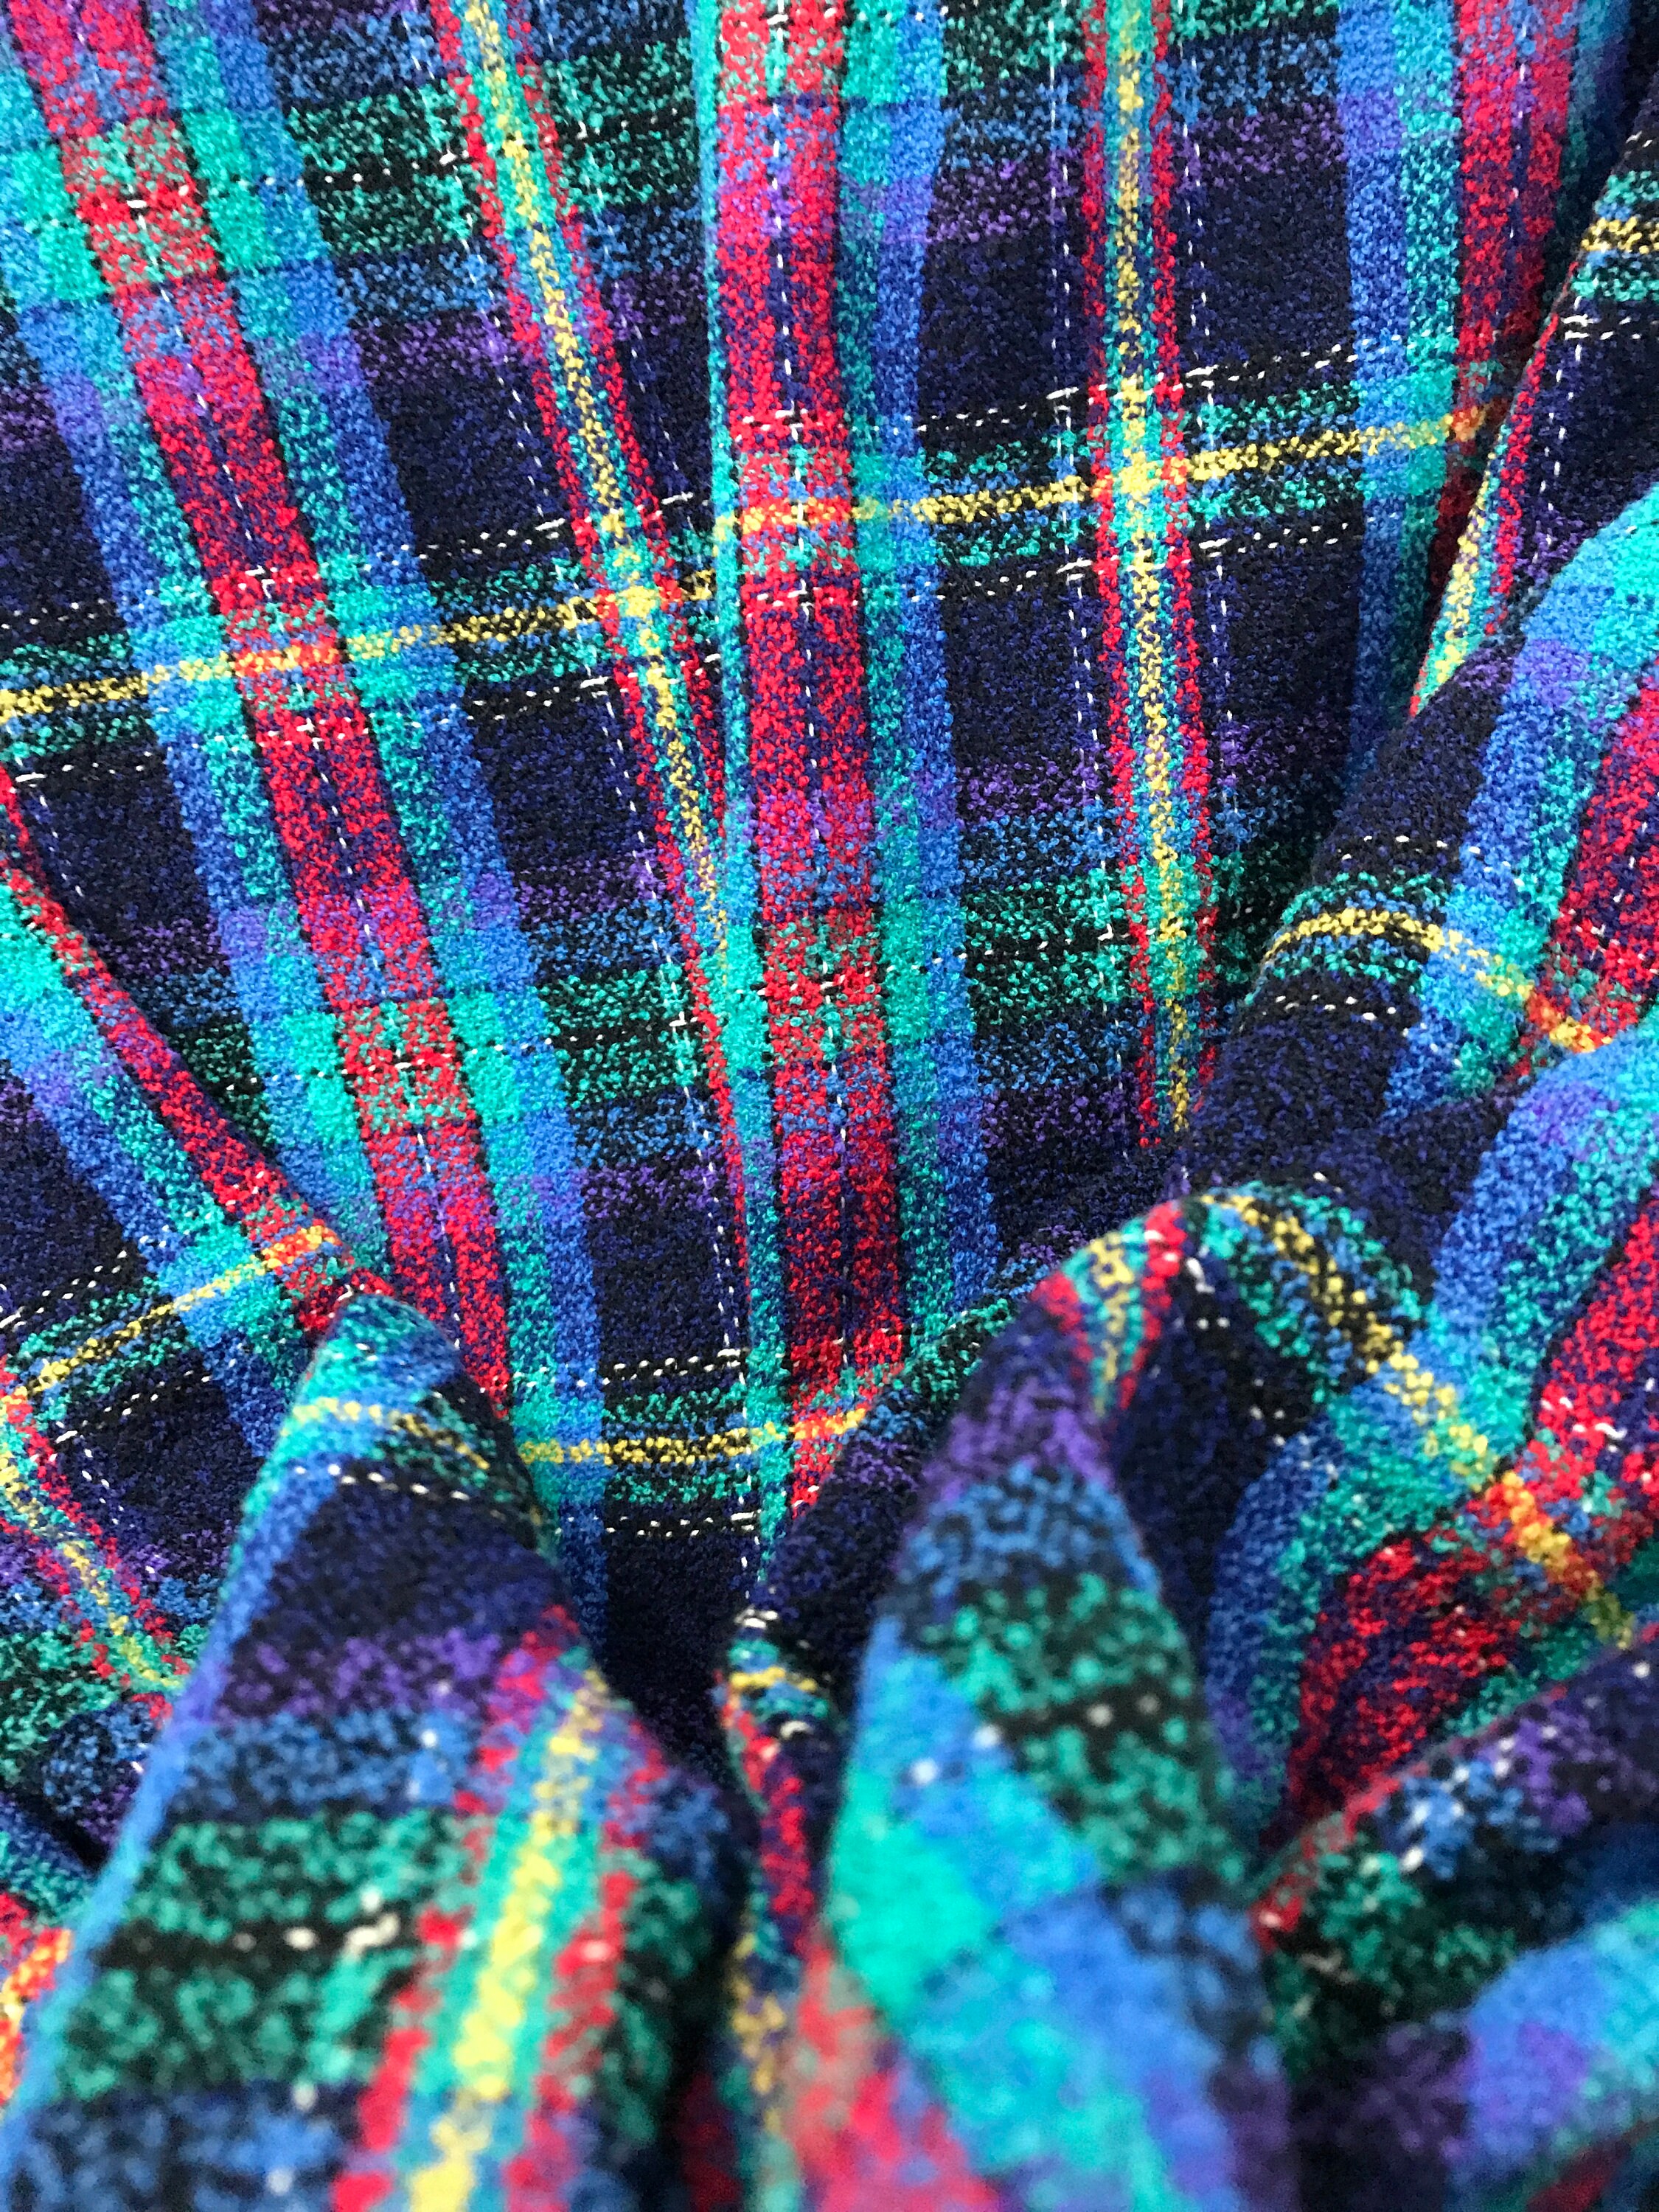 Tweed Boucle Check Fabric Red Blue Pure Wool Check Fabric Kilt | Etsy